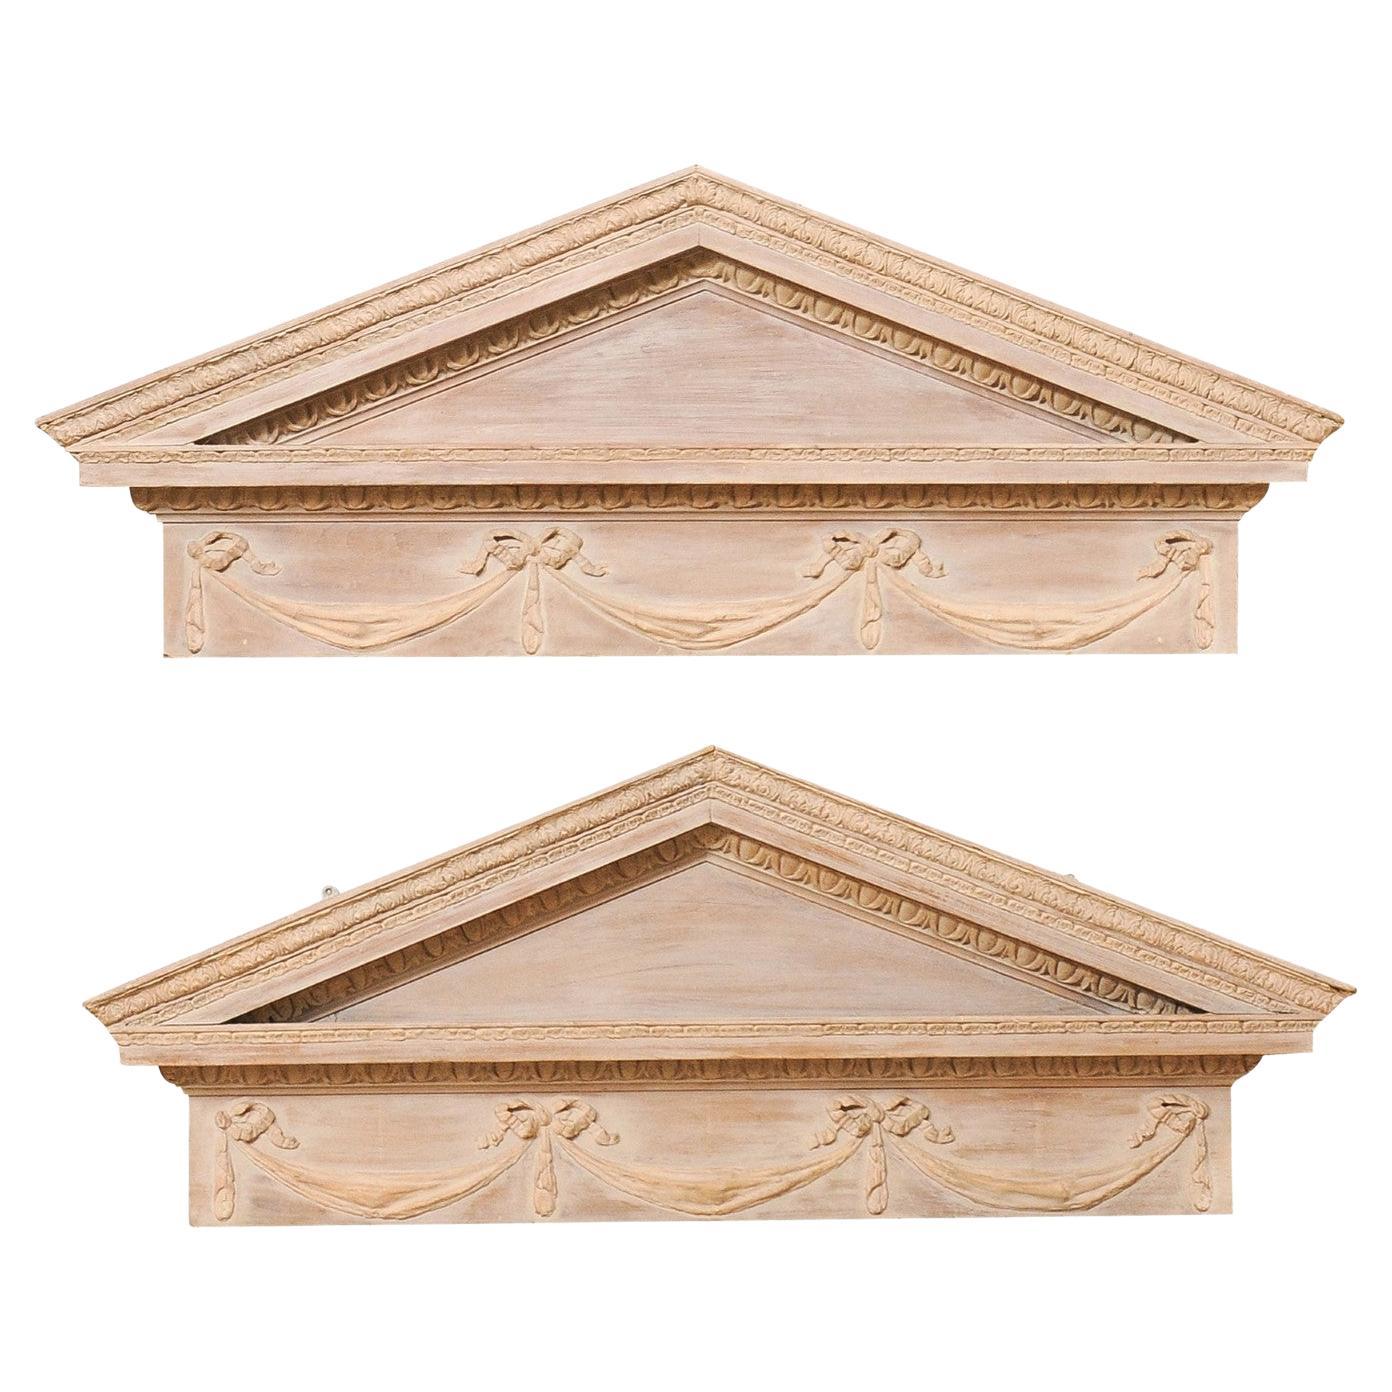 Pair of Neoclassic Style Hanging Wood Pediments